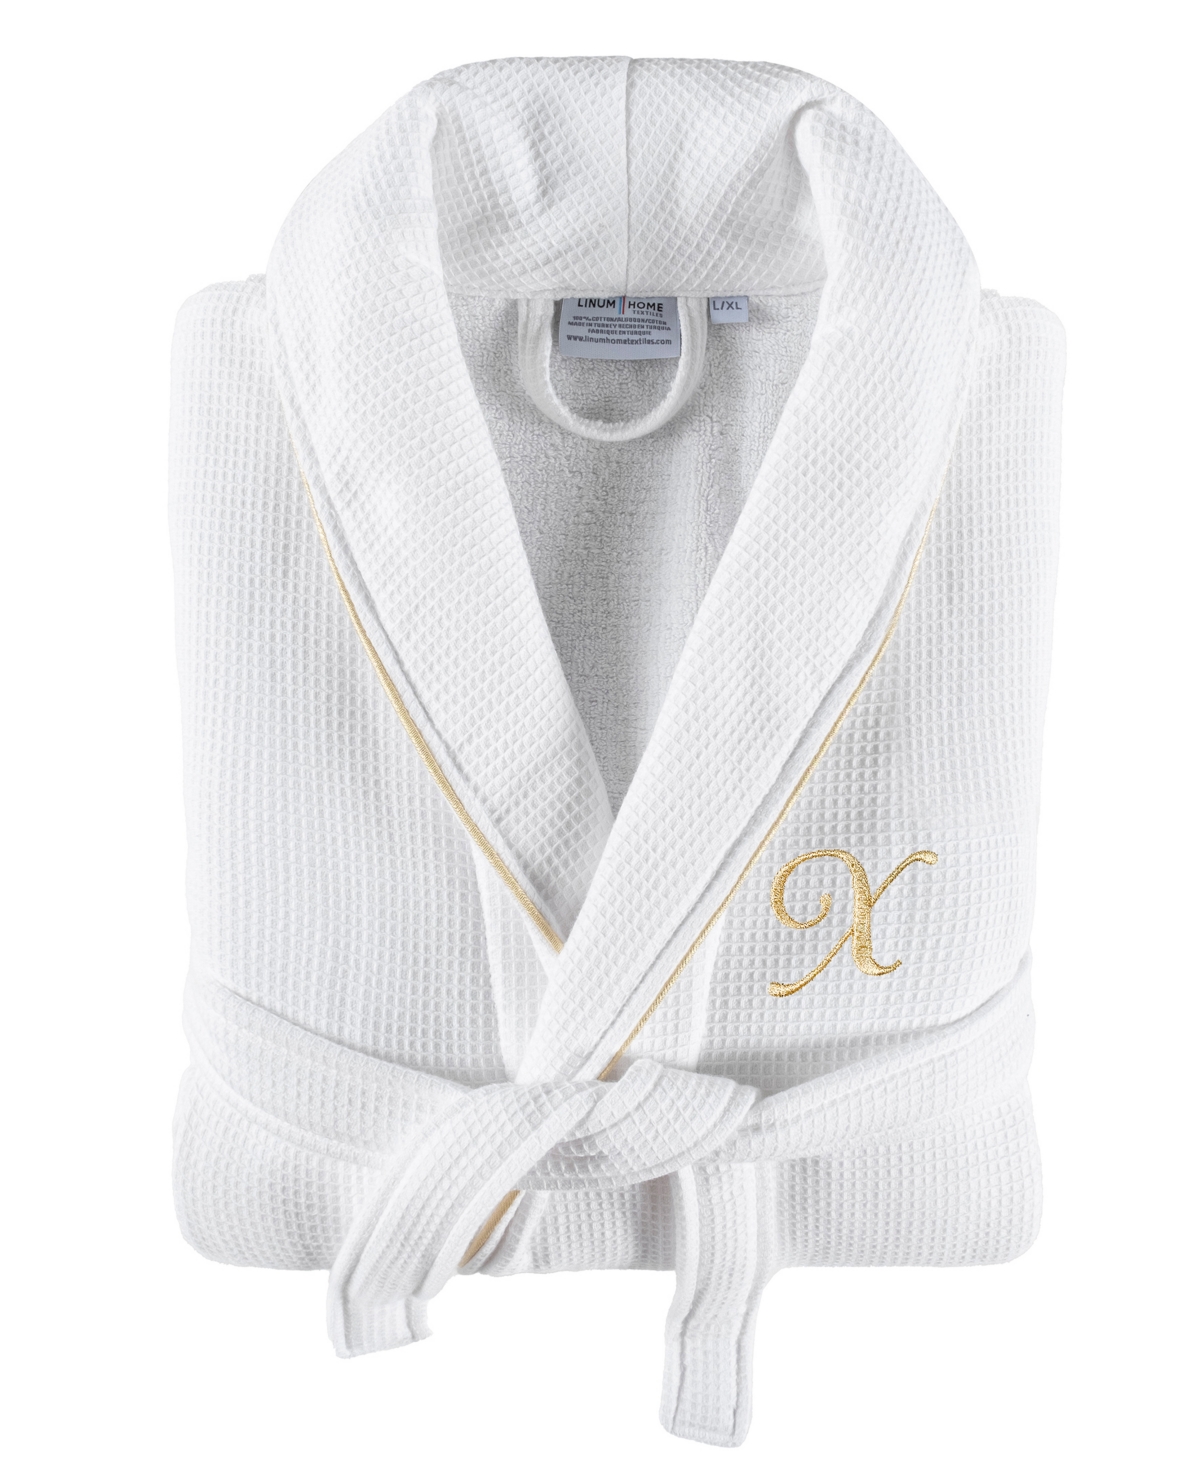 Linum Home Textiles 100% Turkish Cotton Unisex Personalized Waffle Weave Terry Bathrobe With Satin Piped Trim In White X